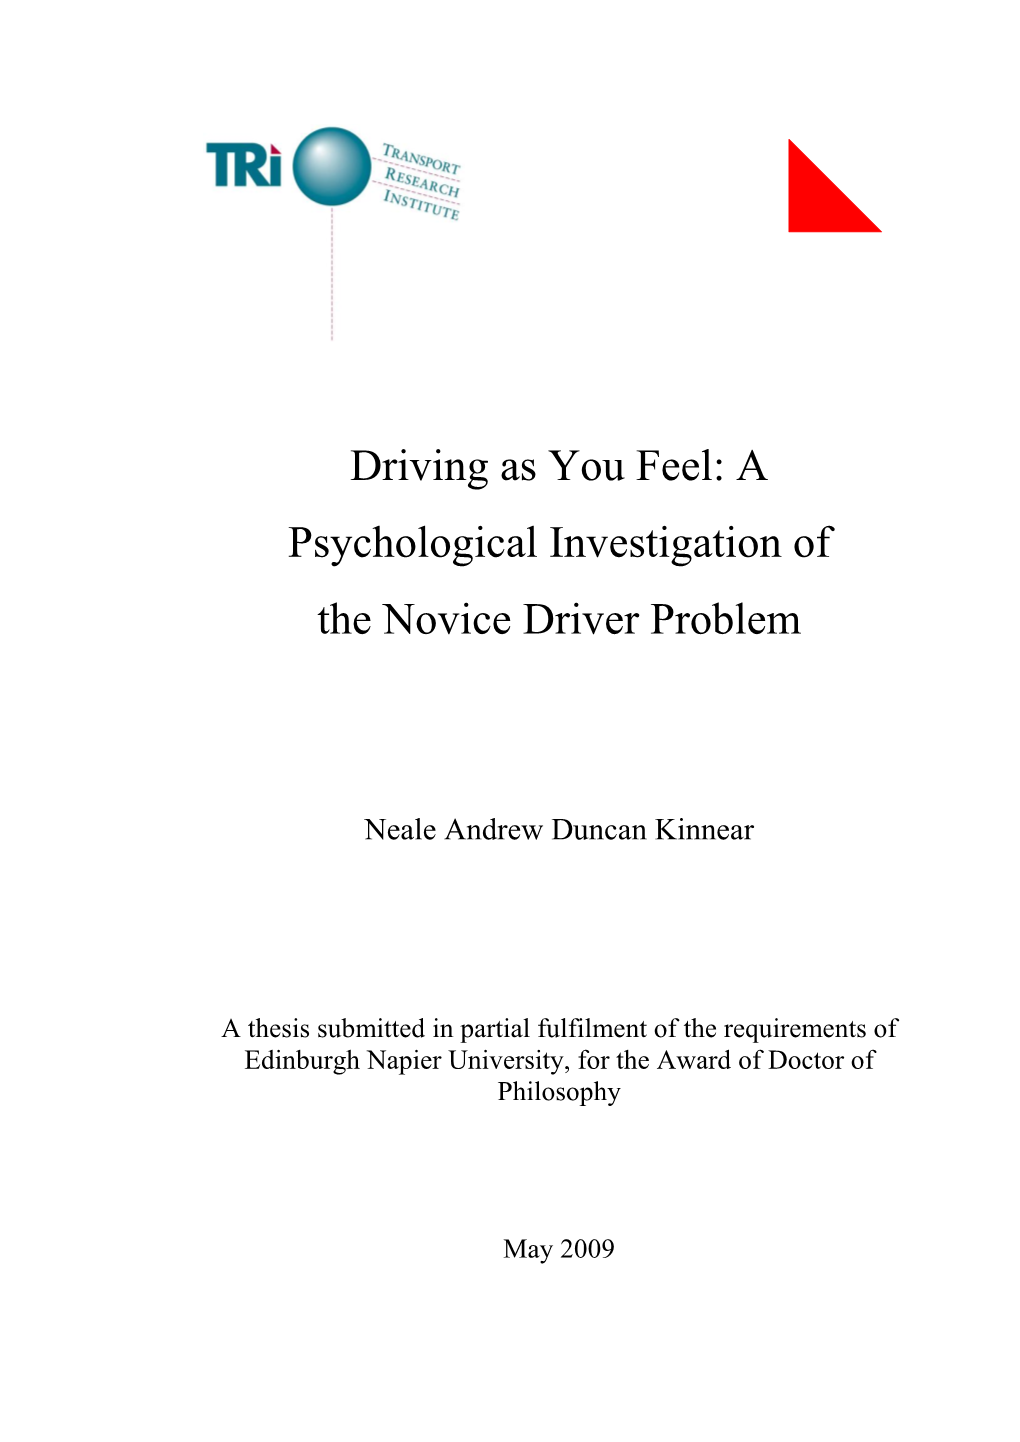 Driving As You Feel: a Psychological Investigation of the Novice Driver Problem